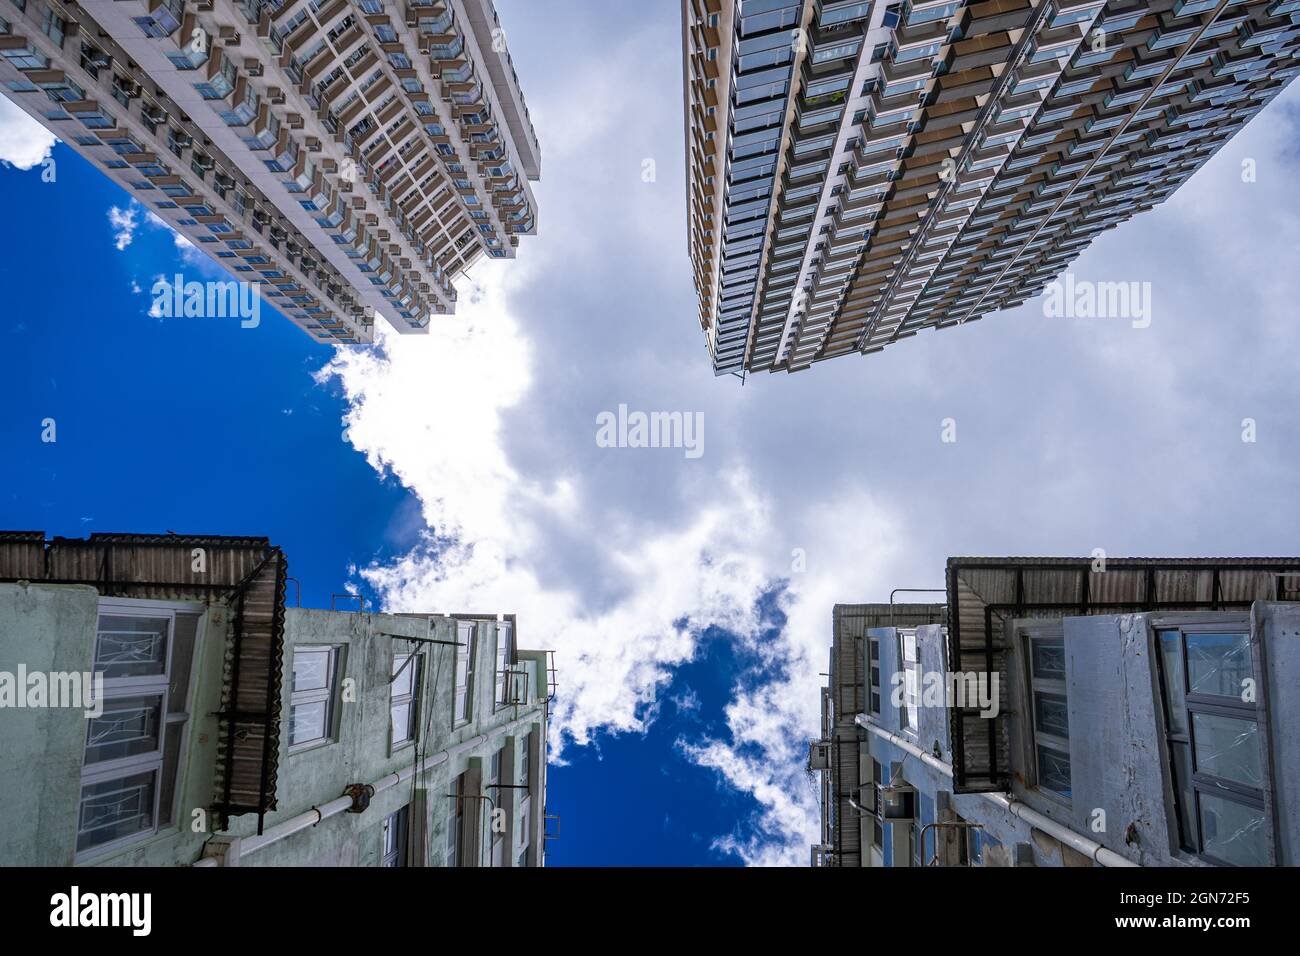 The Old and New Skyscrapers of Hong Kong Stock Photo